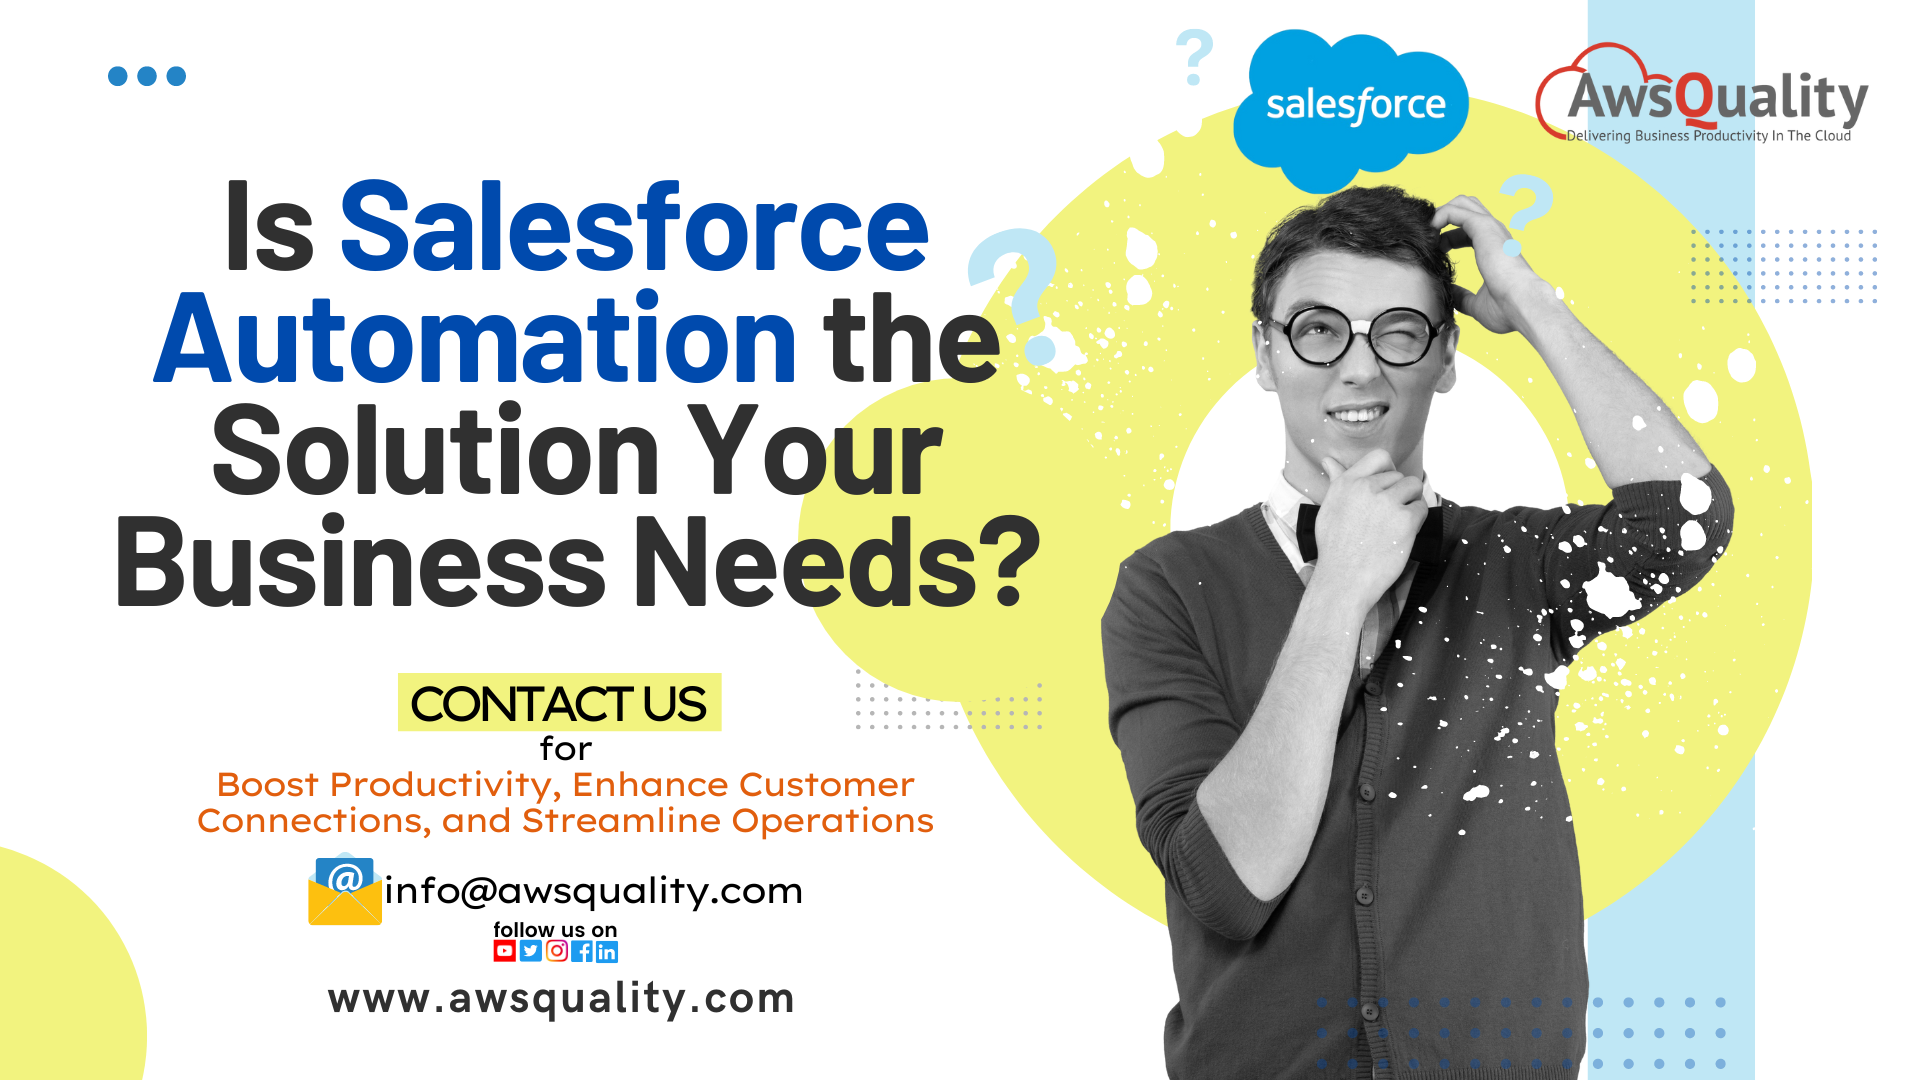 Salesforce automation solutions